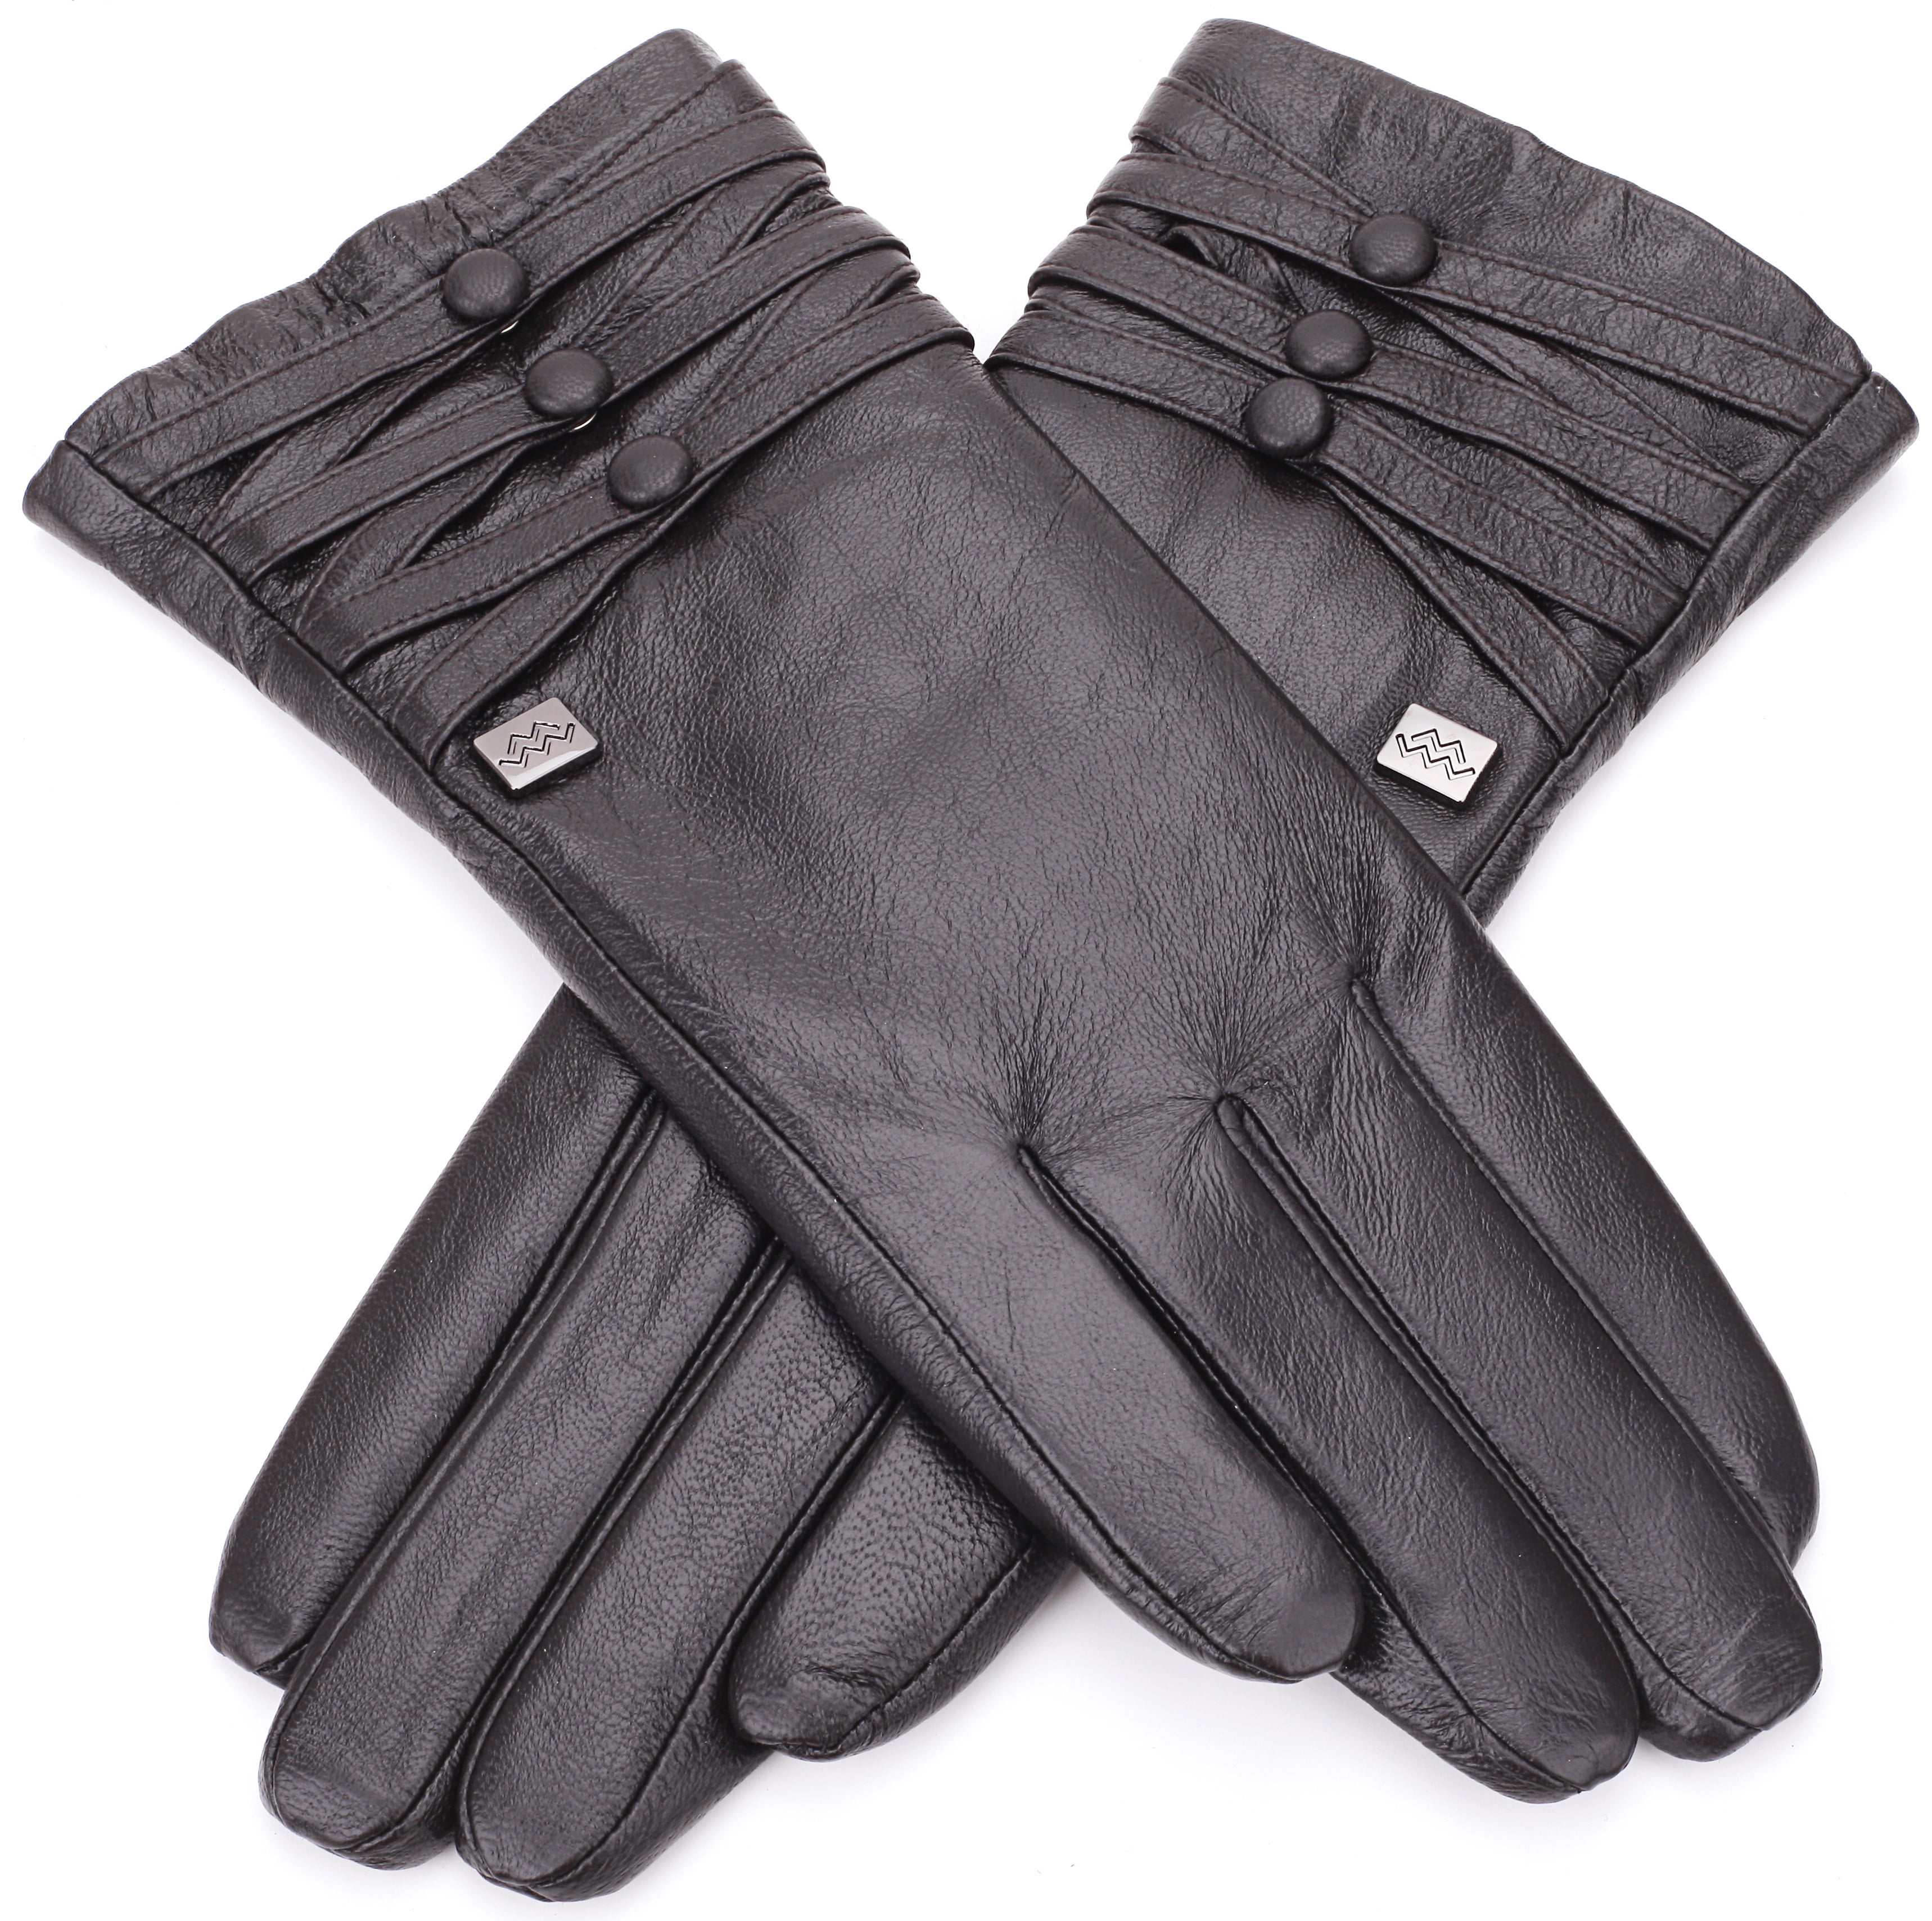 Lined Lambskin String Back Driving Gloves by Tails & the Unexpected black/brown 